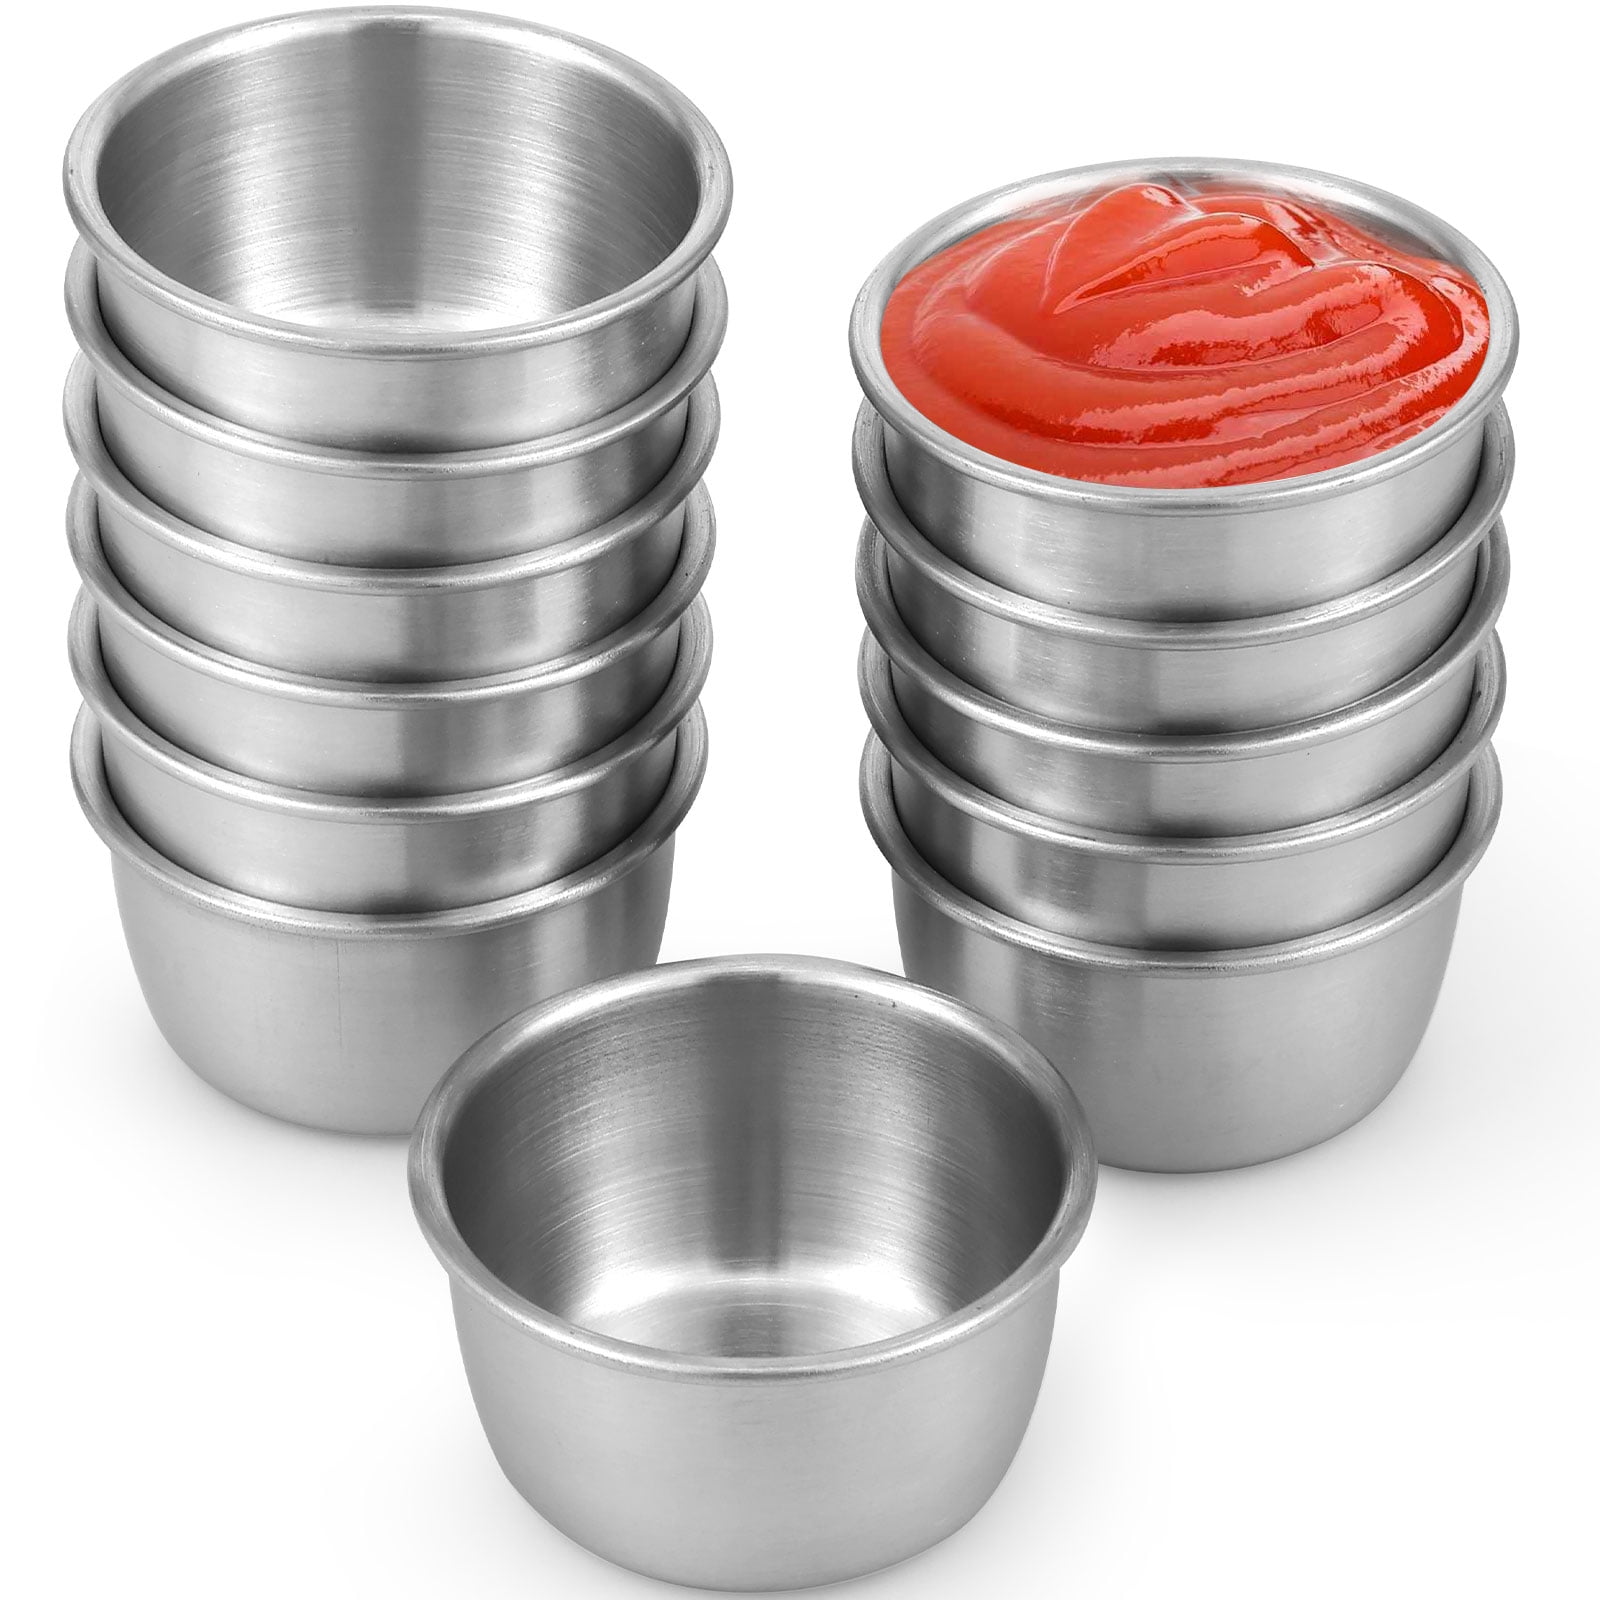 Stainless Steel Sauce Cups with Silicone Lids Reusable for Dipping Sauces  Salad Portion Cups for Restaurant